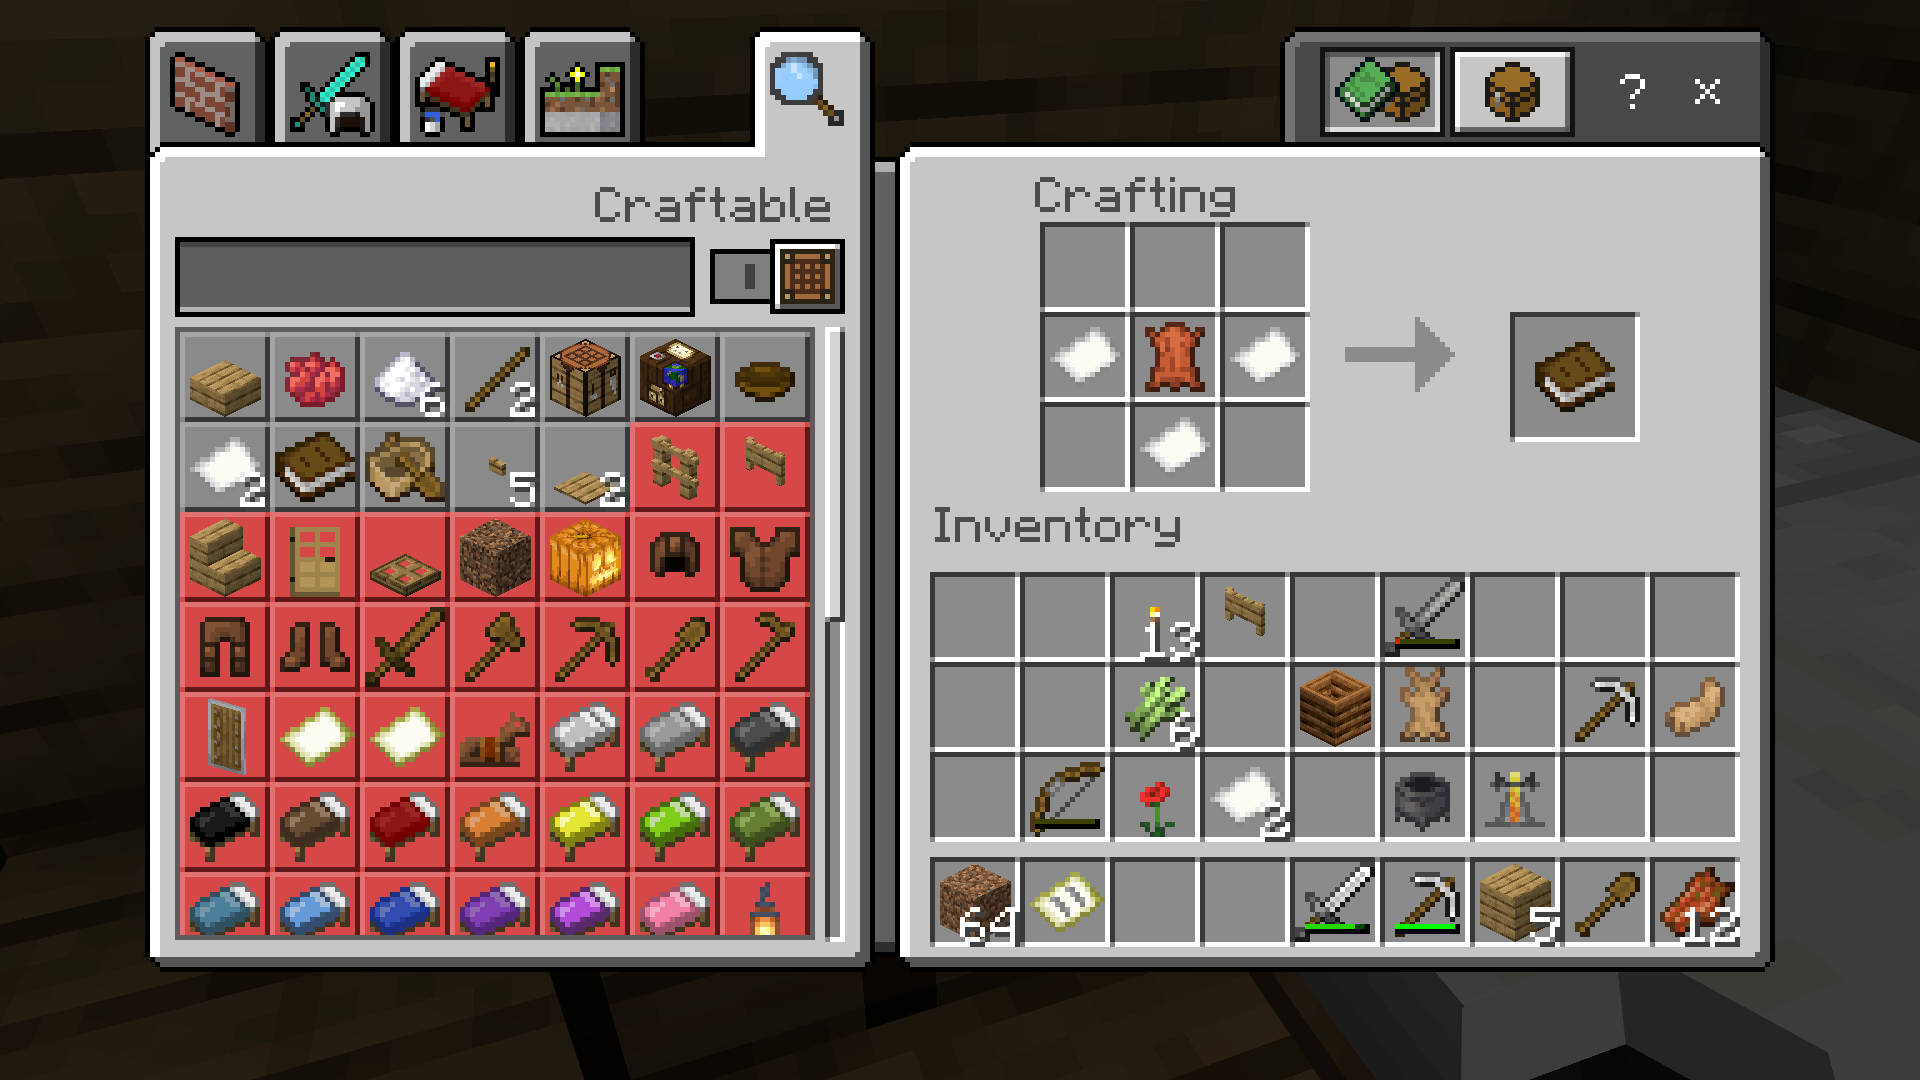 minecraft book and quill recipe